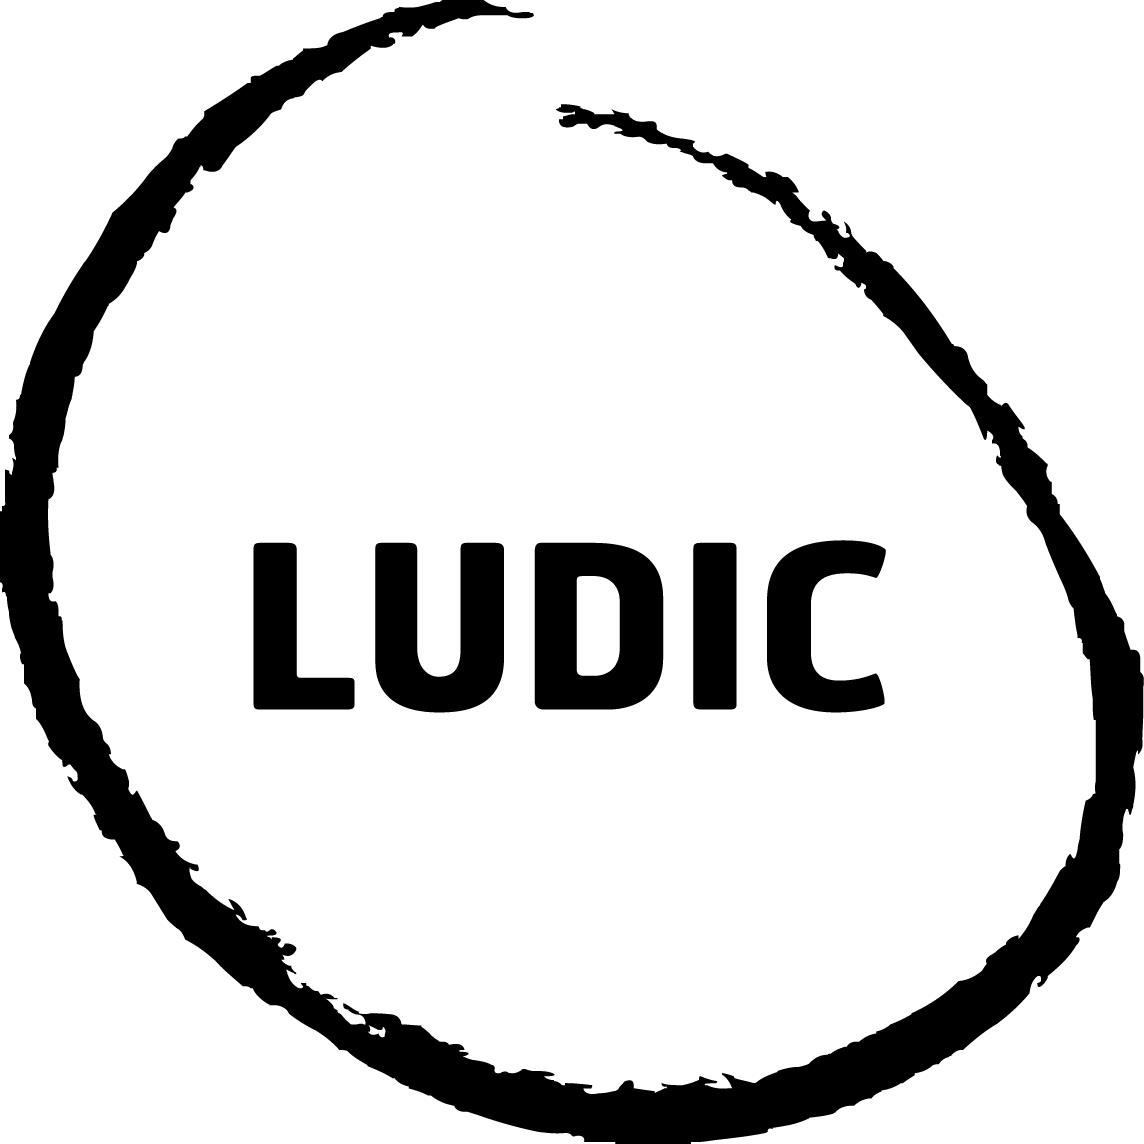 LUDIC_LOGO_BLACK_new News - Page 10 - Results from #72 - Results from #72